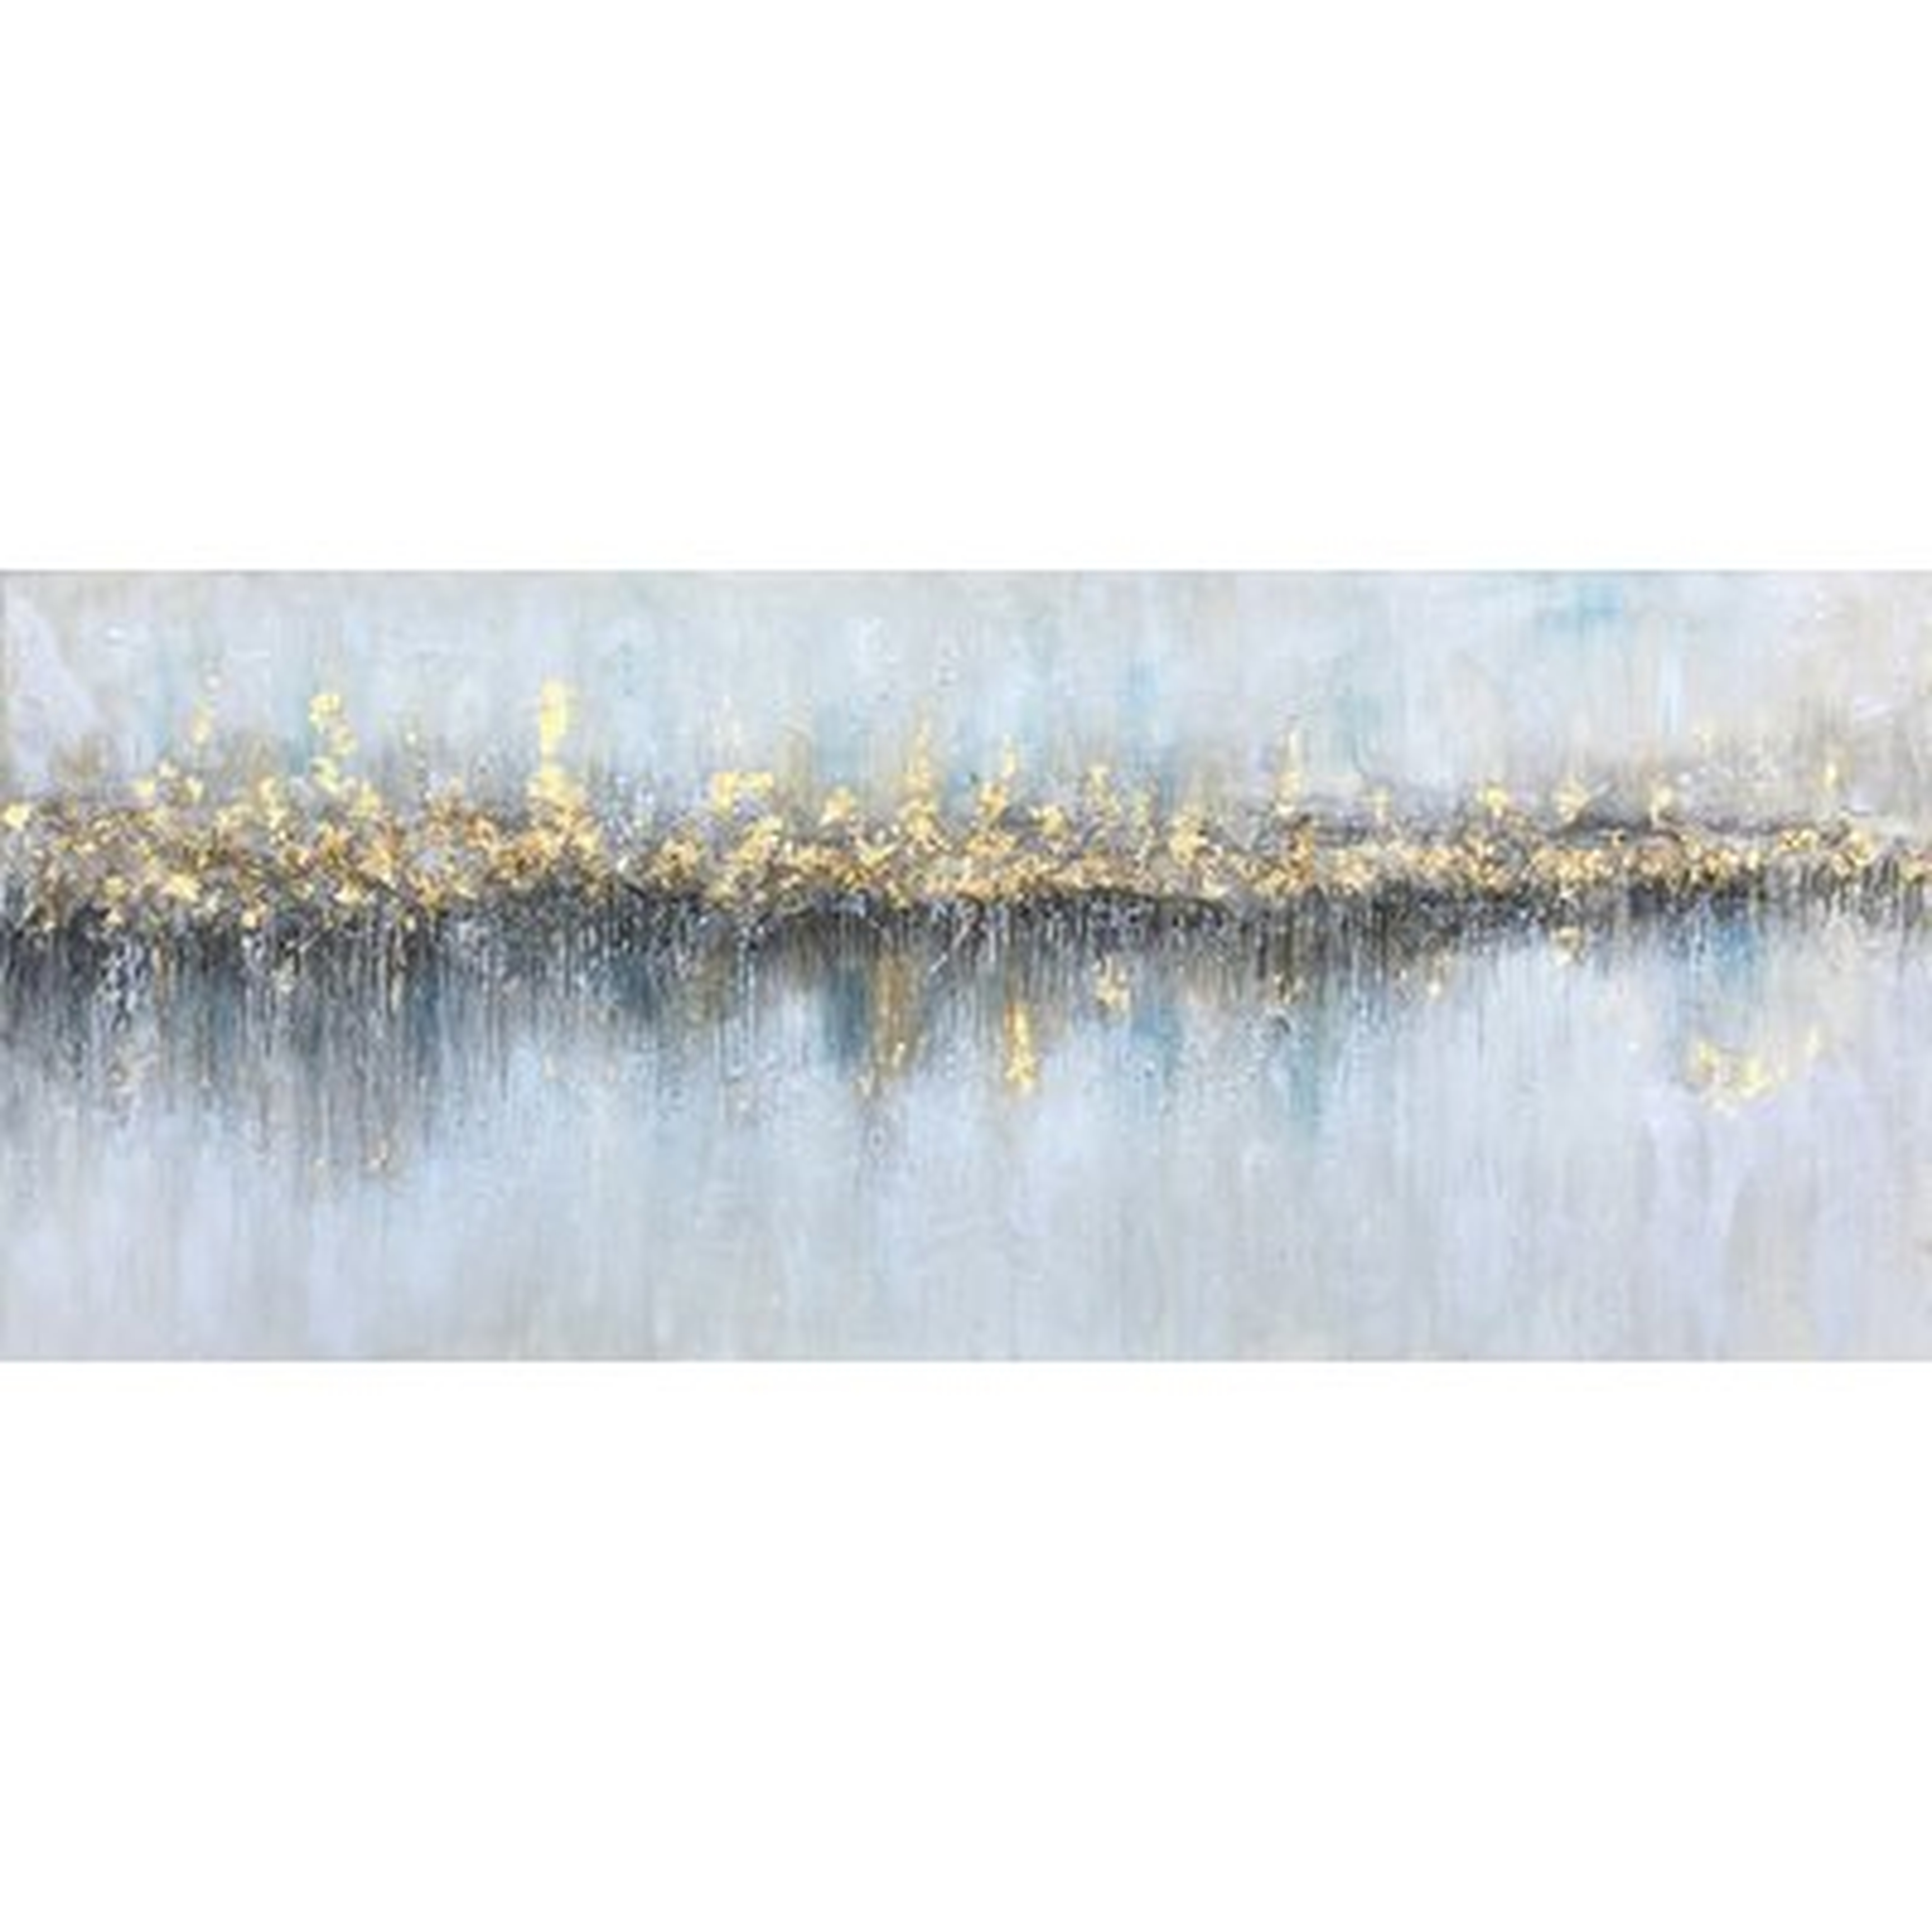 'Glowing from Afar' 100% hand-painted on Wrapped Canvas - Wayfair